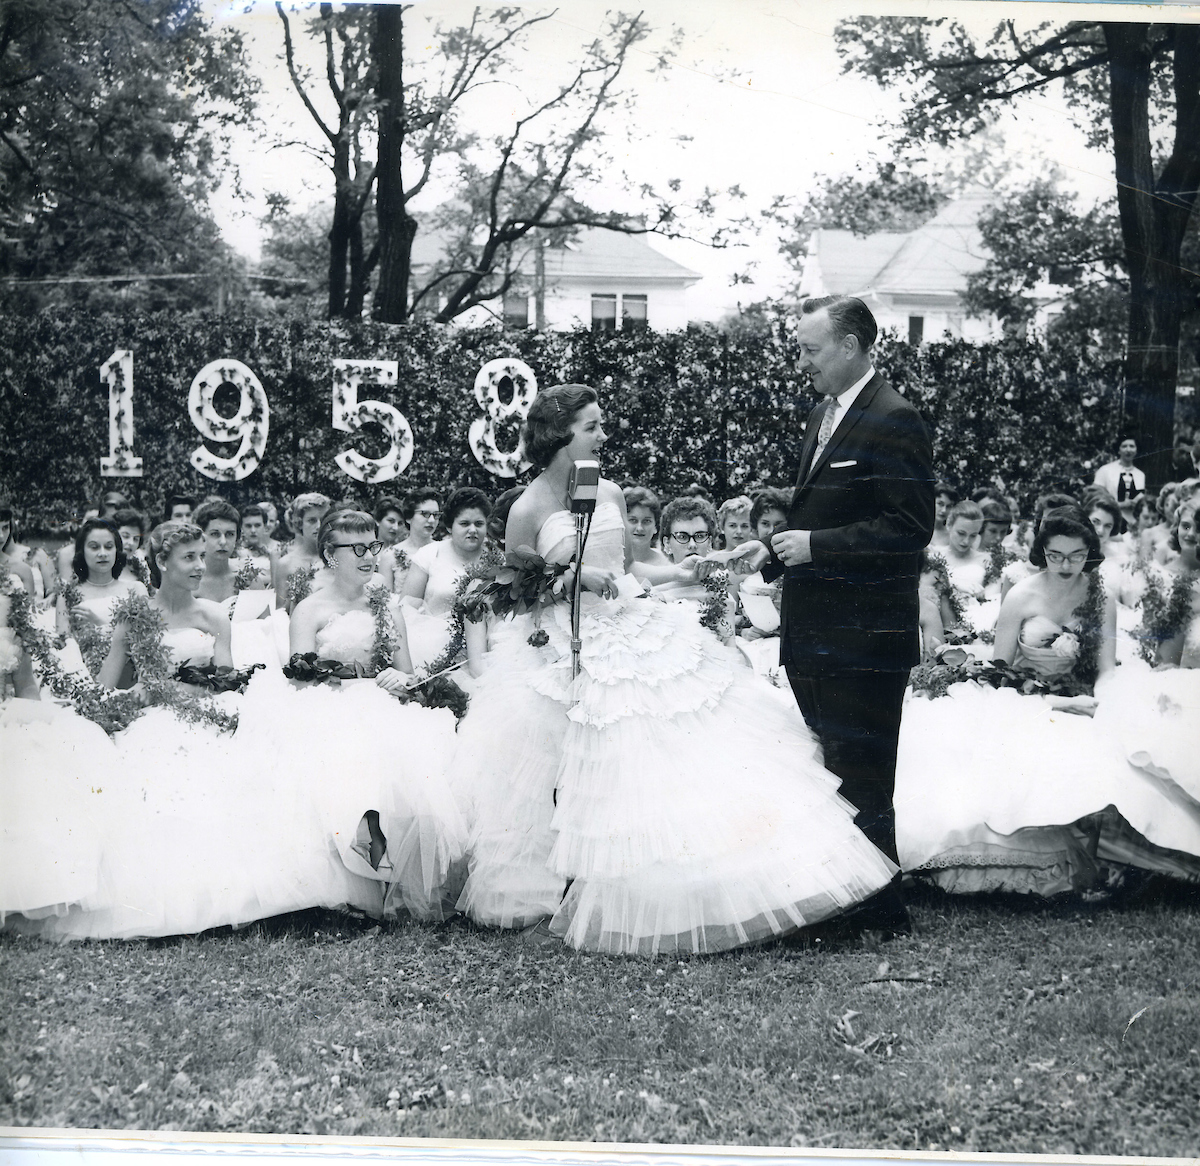 Ivy Chain ceremony in 1958.